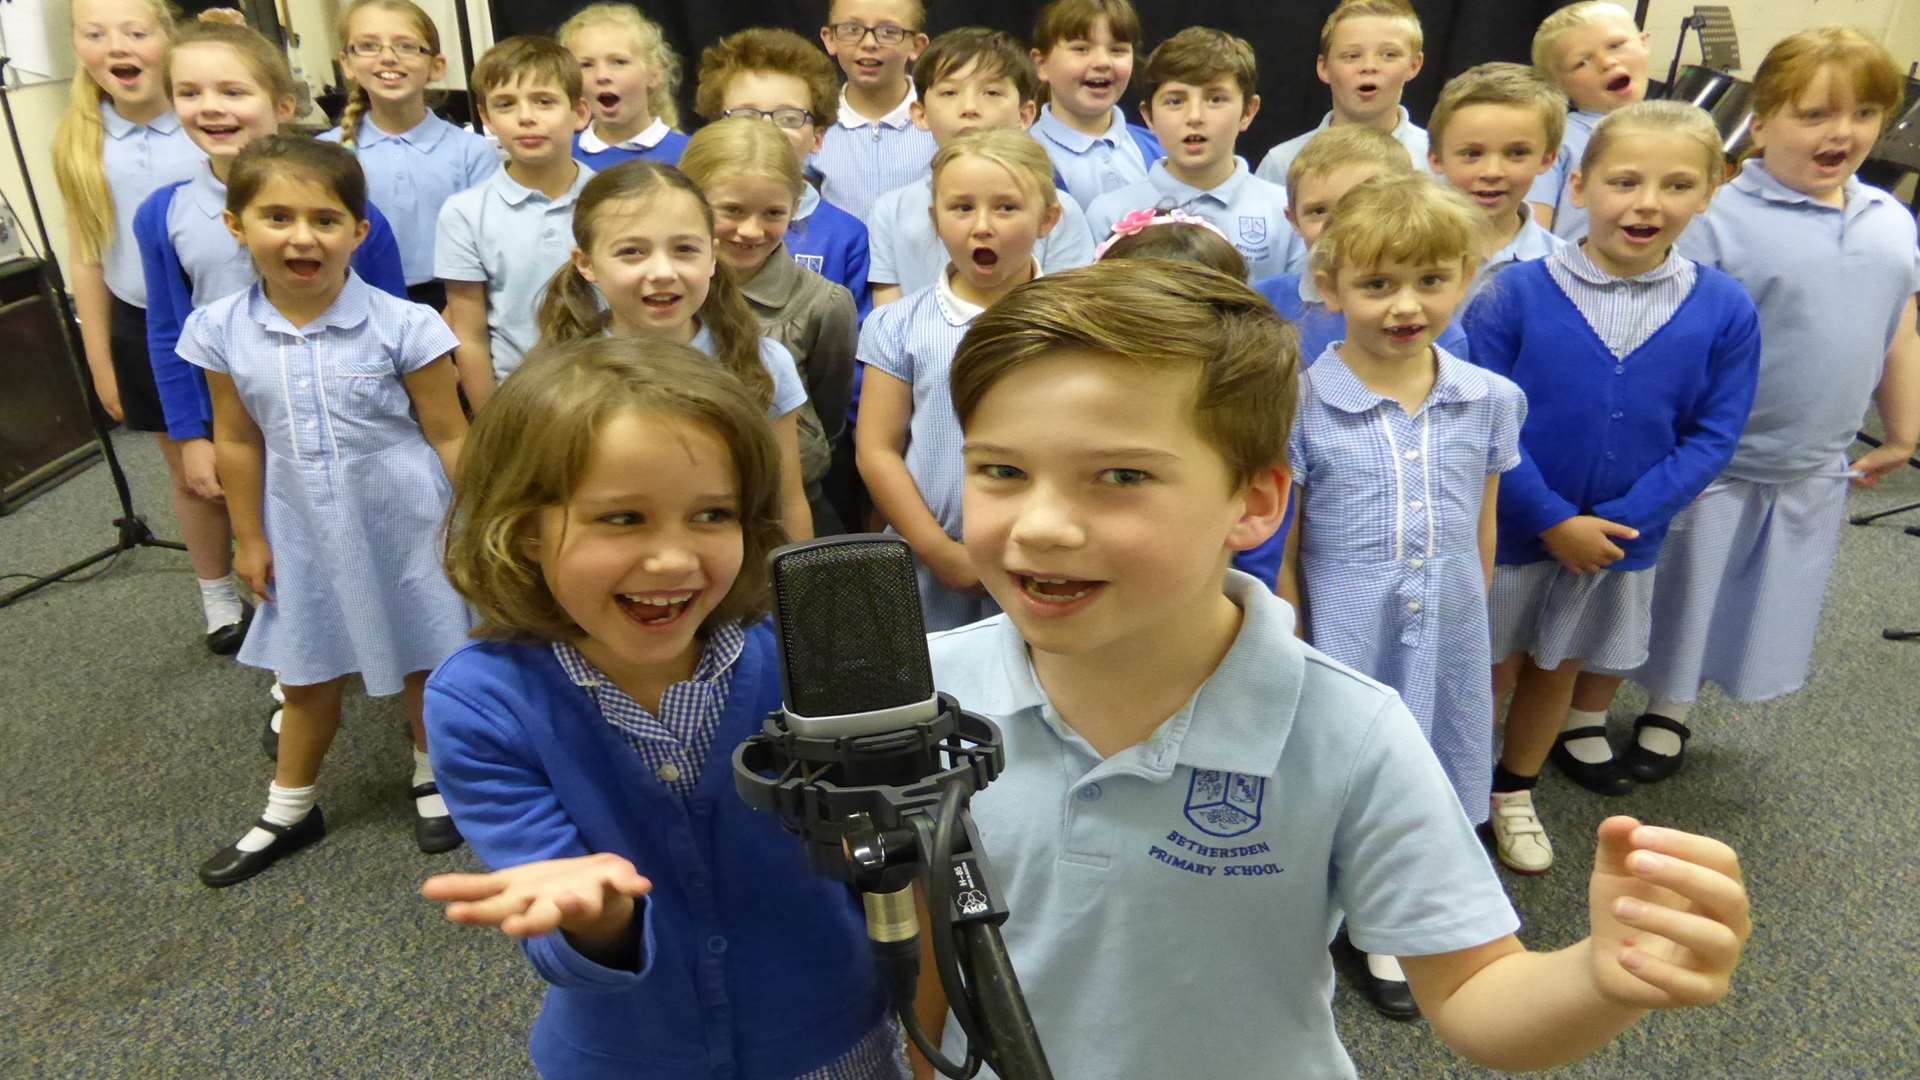 Rhea Carysforth, seven, and Harry Fensome, seven, lead the Bethersden Primary School choir as they record their KM Walk to School Song Contest track in 2015. Entries for this year's contest are now open.